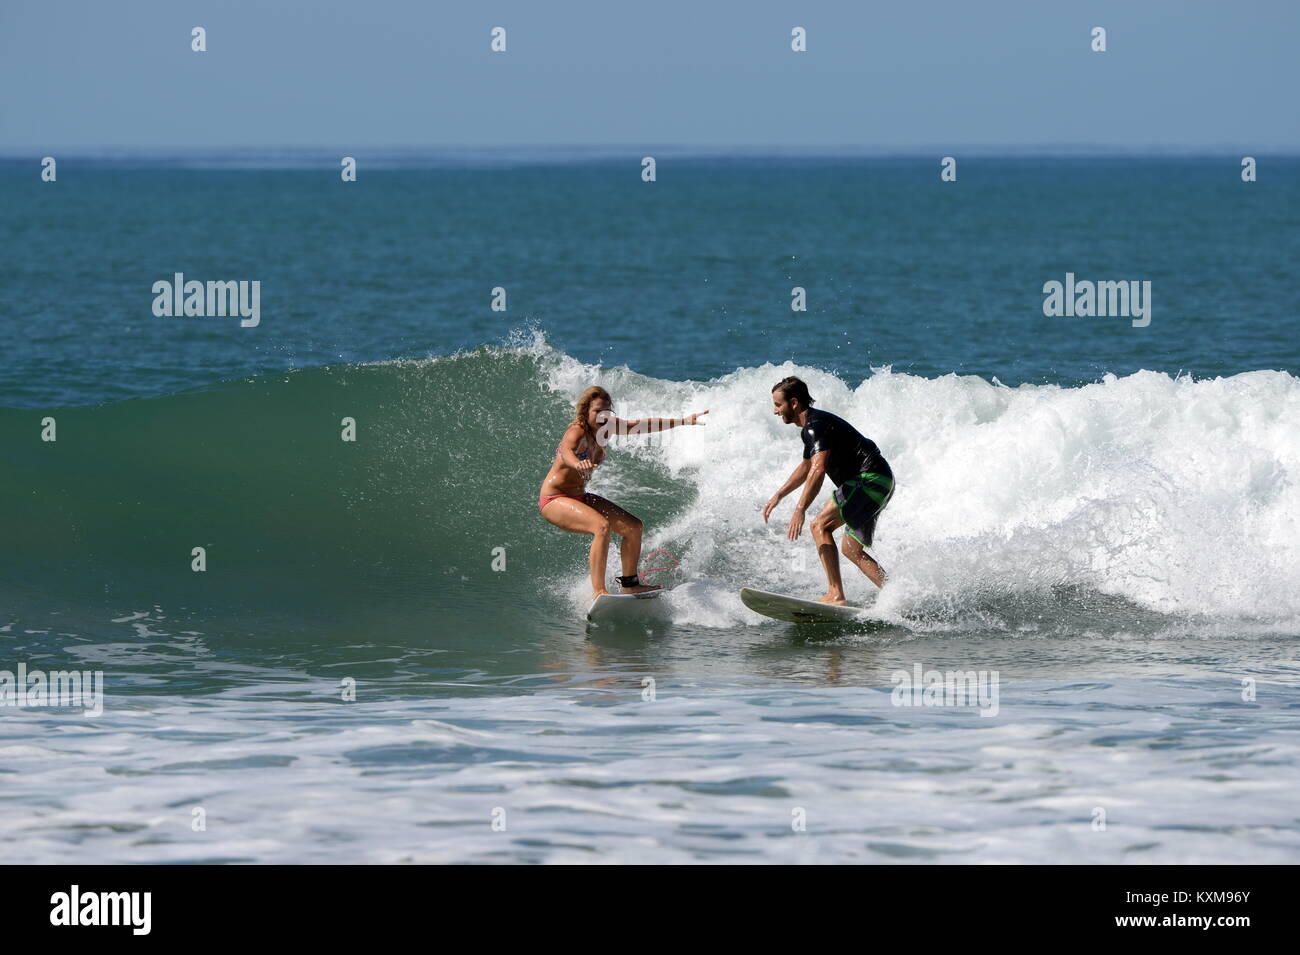 Surfing wth a friend (sequence 3)  in Costa Rica- newly engaged Denise and Kris share a wave together at Santa Teresa Stock Photo